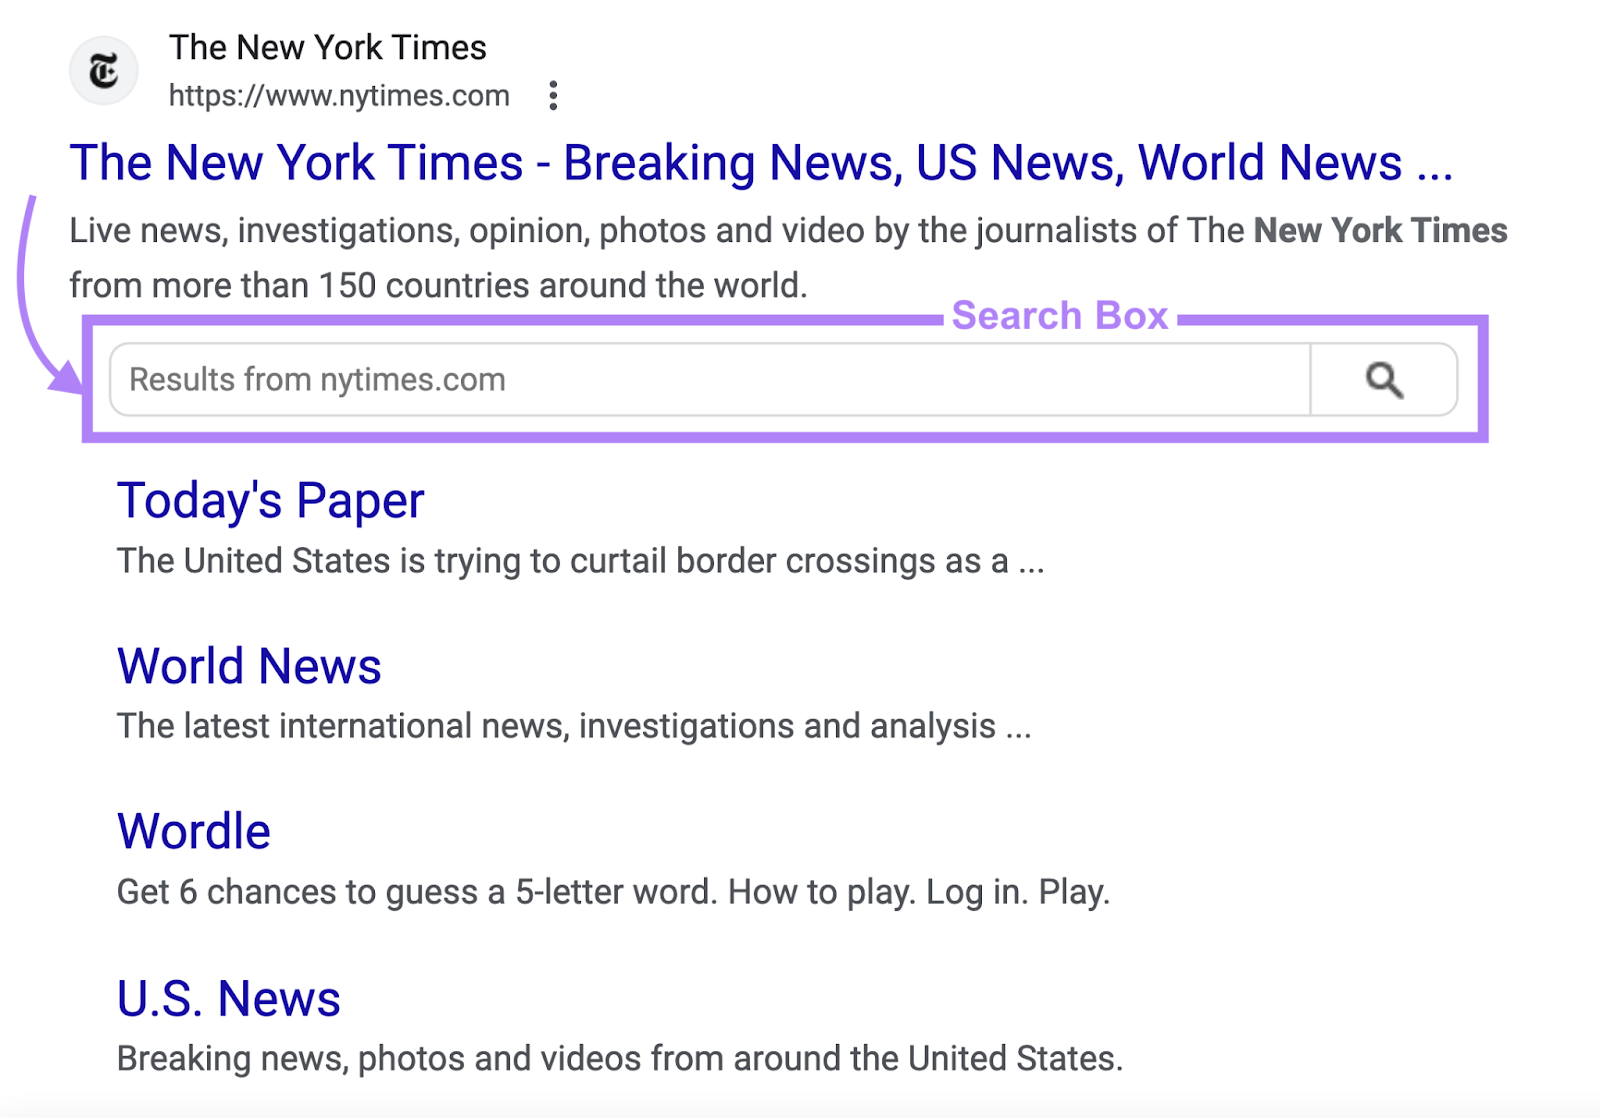 search box in "The New York Times" site in SERP